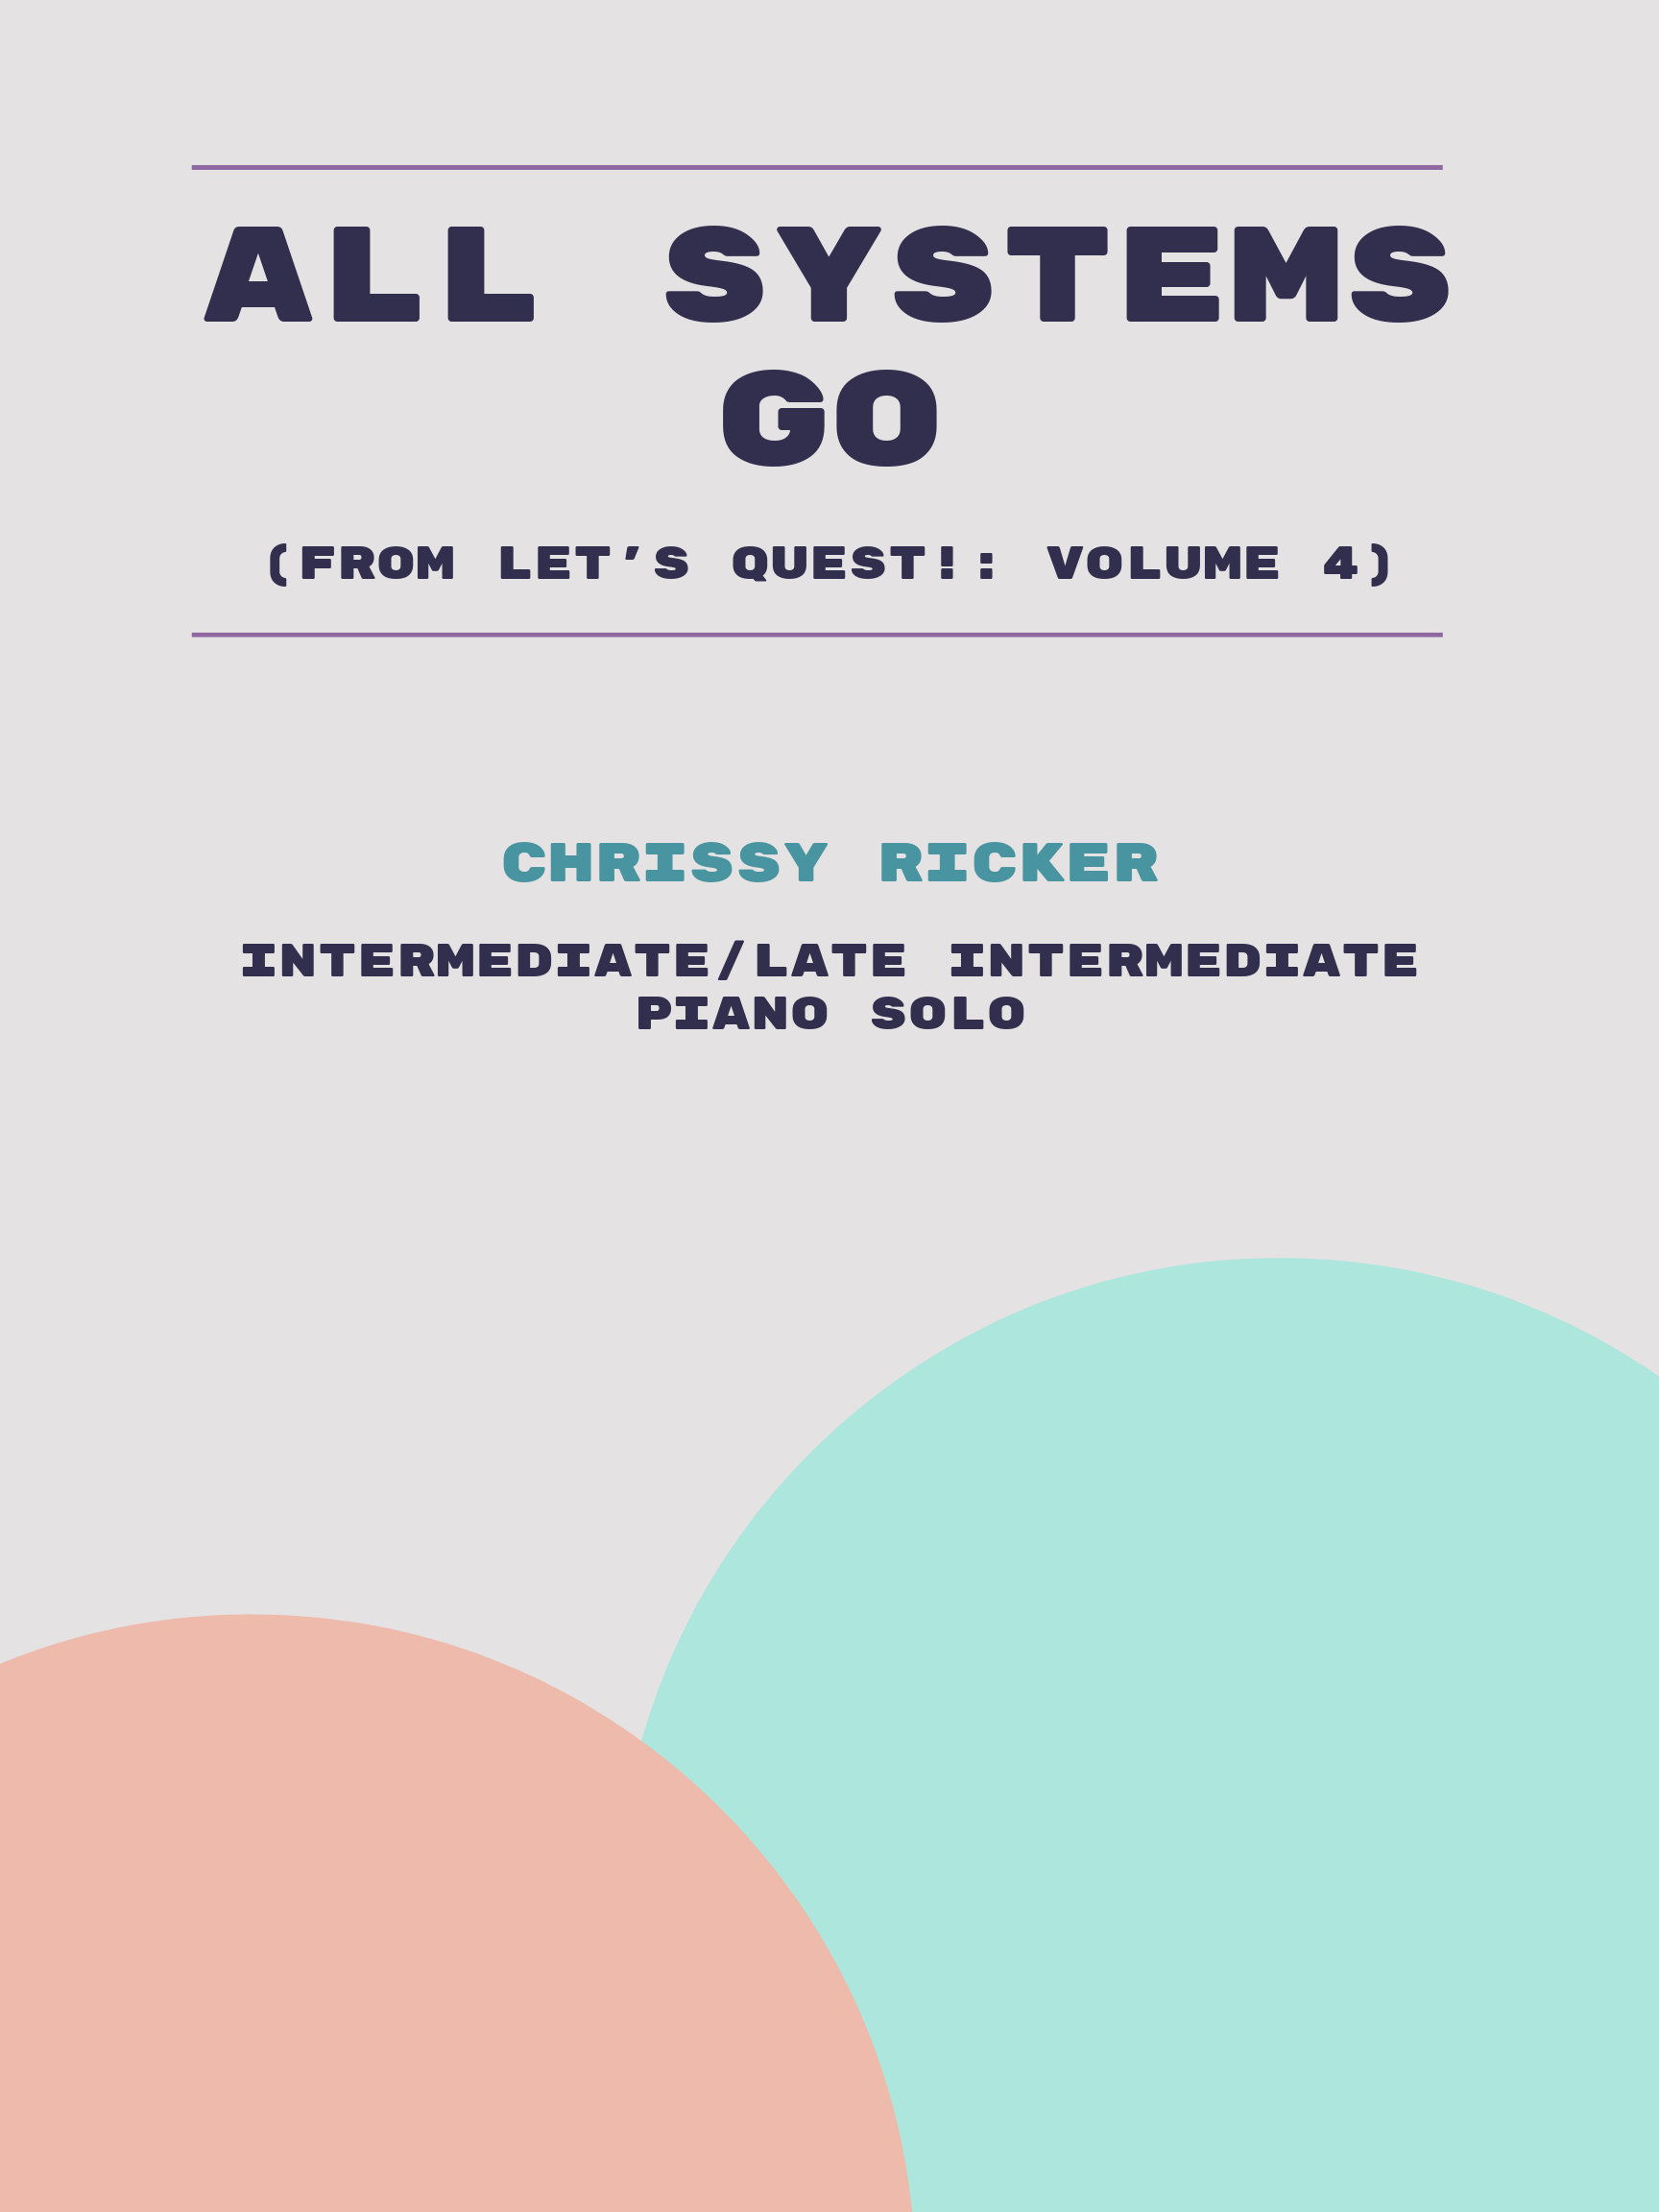 All Systems Go by Chrissy Ricker